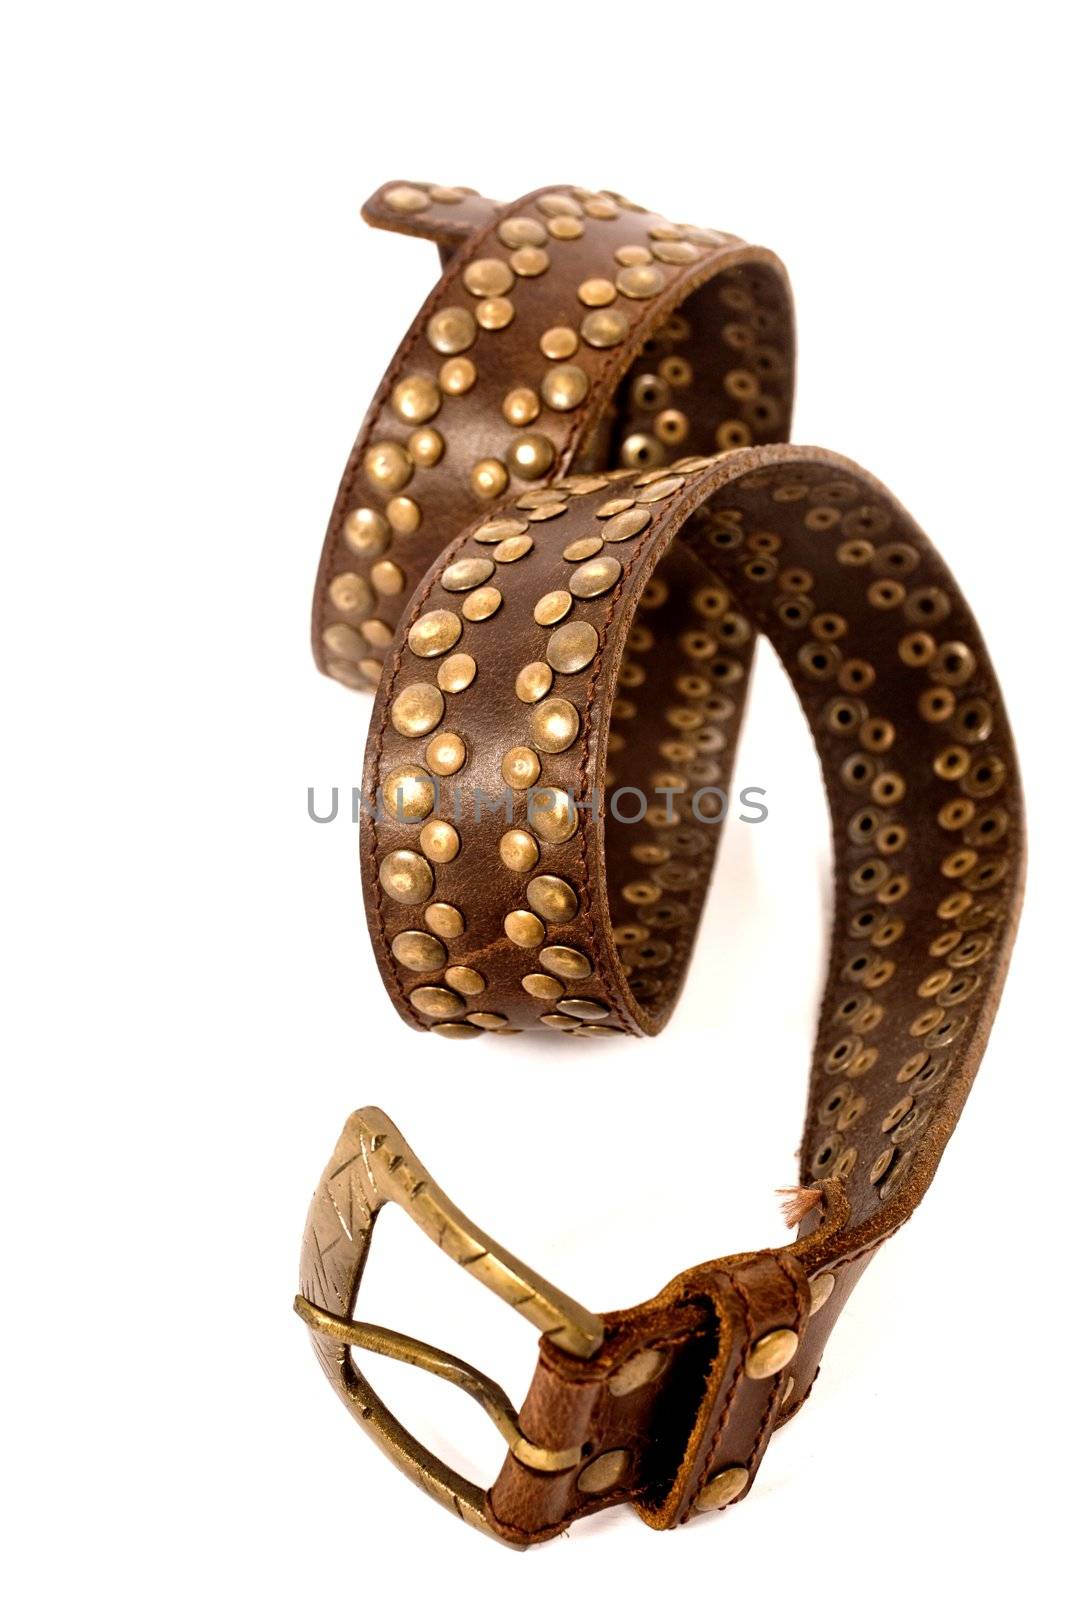 coiled belt on isolated background
